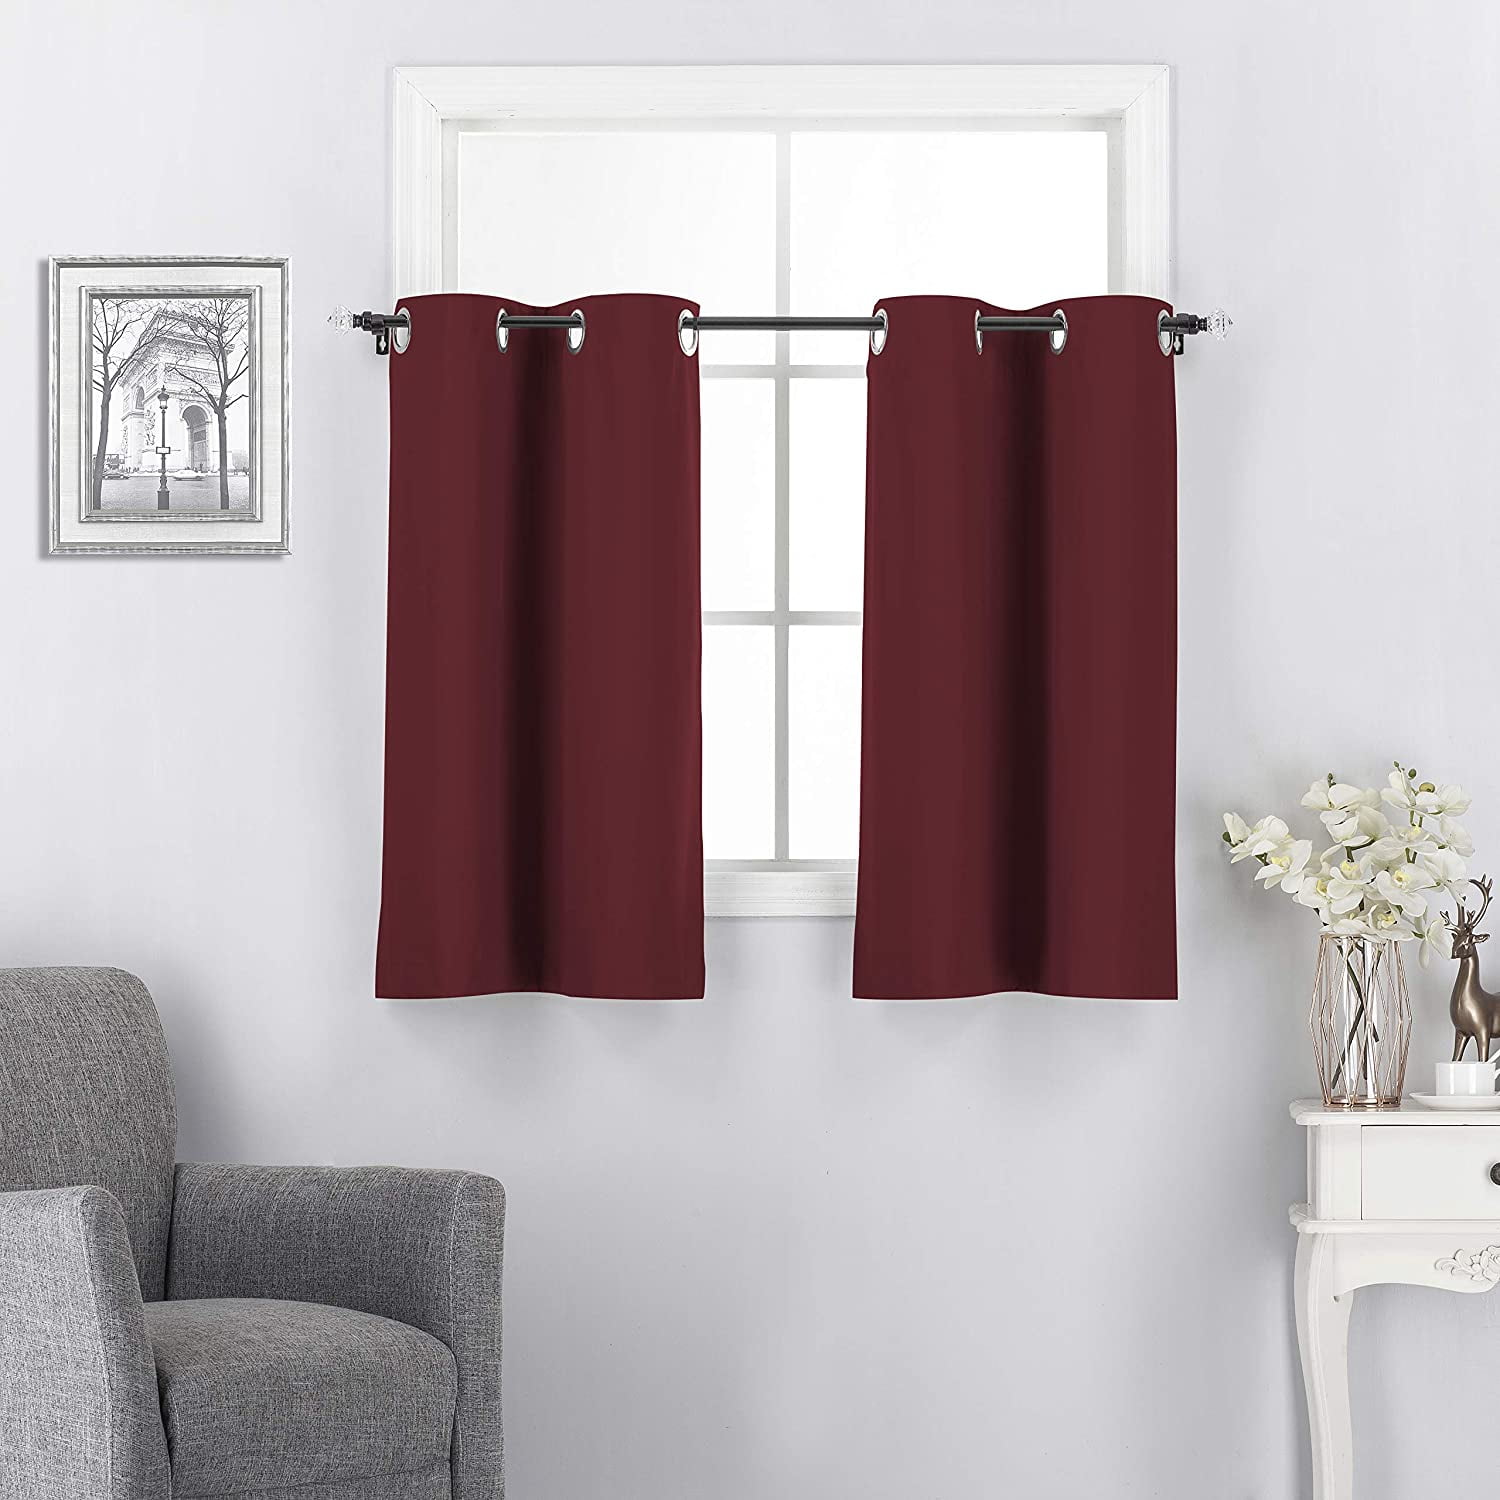 Blackout Plain Curtain - Maroon (Pack of 1)